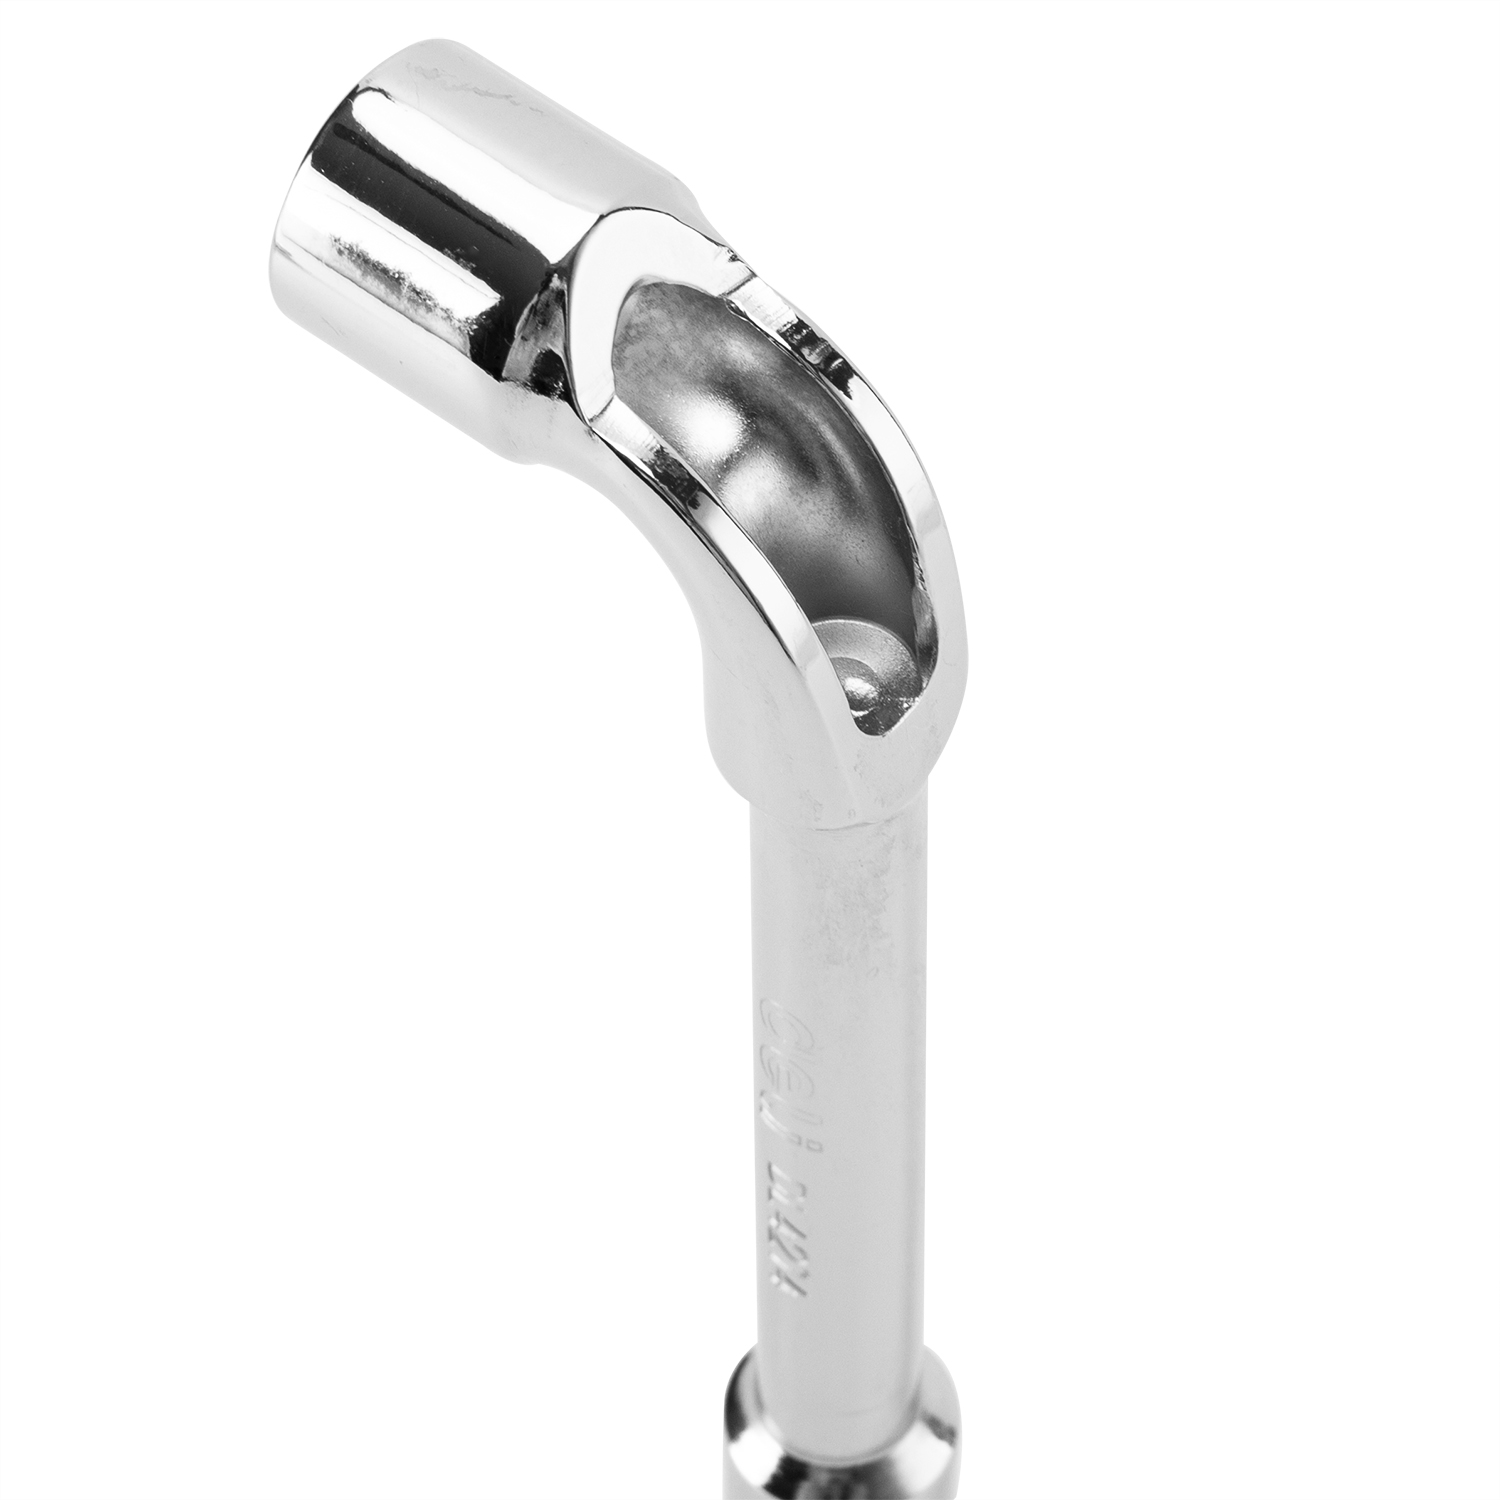 14mm L-Angled socket wrench